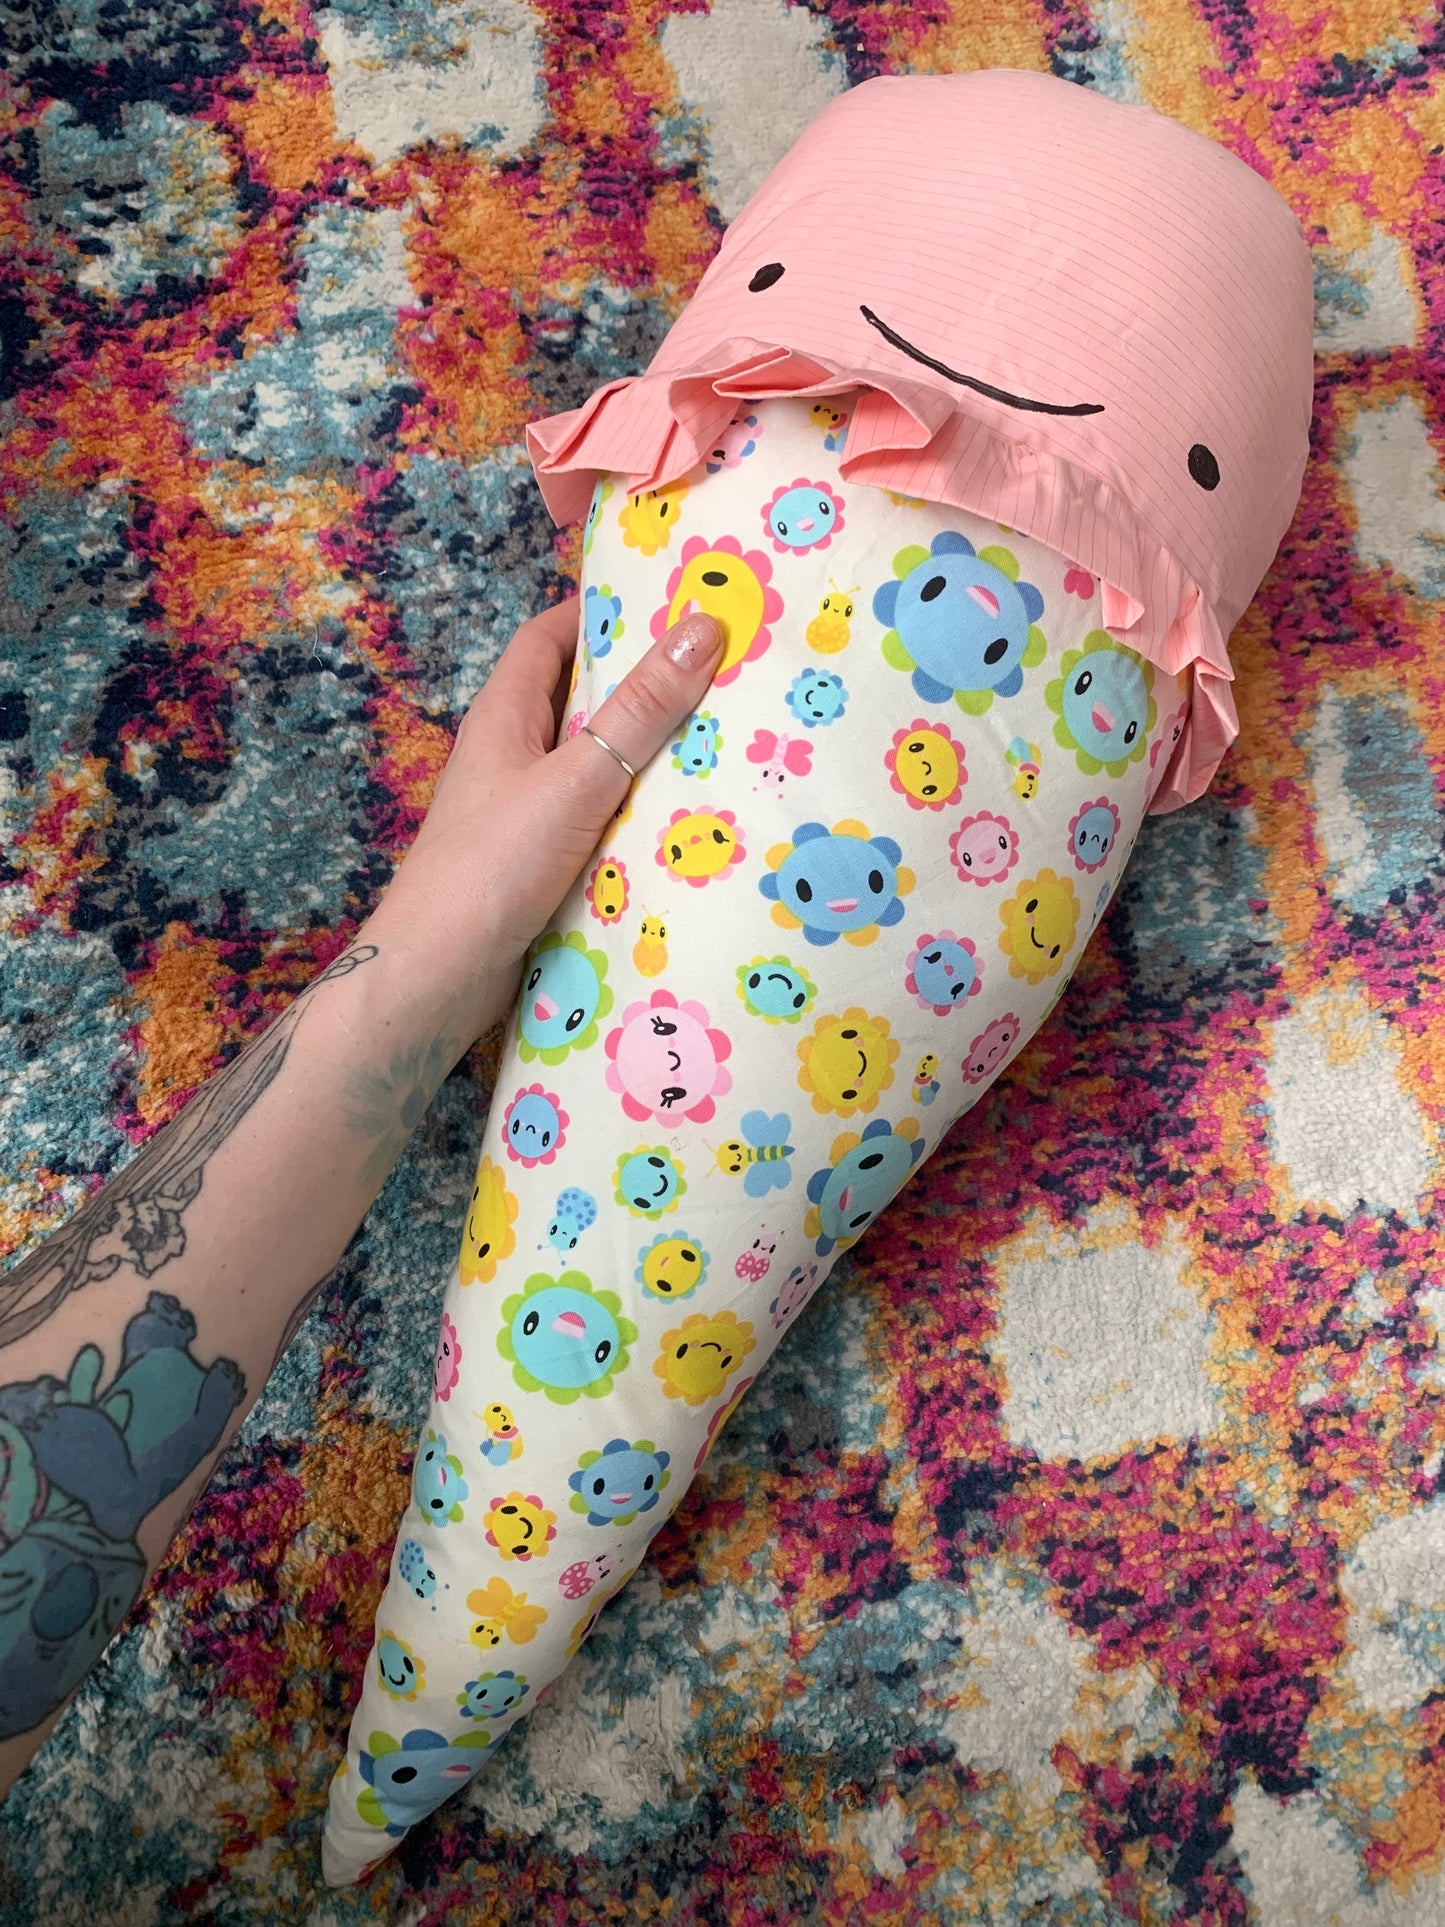 GIANT ice cream cone pillow, with Pink Strawberry ice cream top, a happy face, and colorful flower happy faces allover print fabric cone, held by a hand for scale